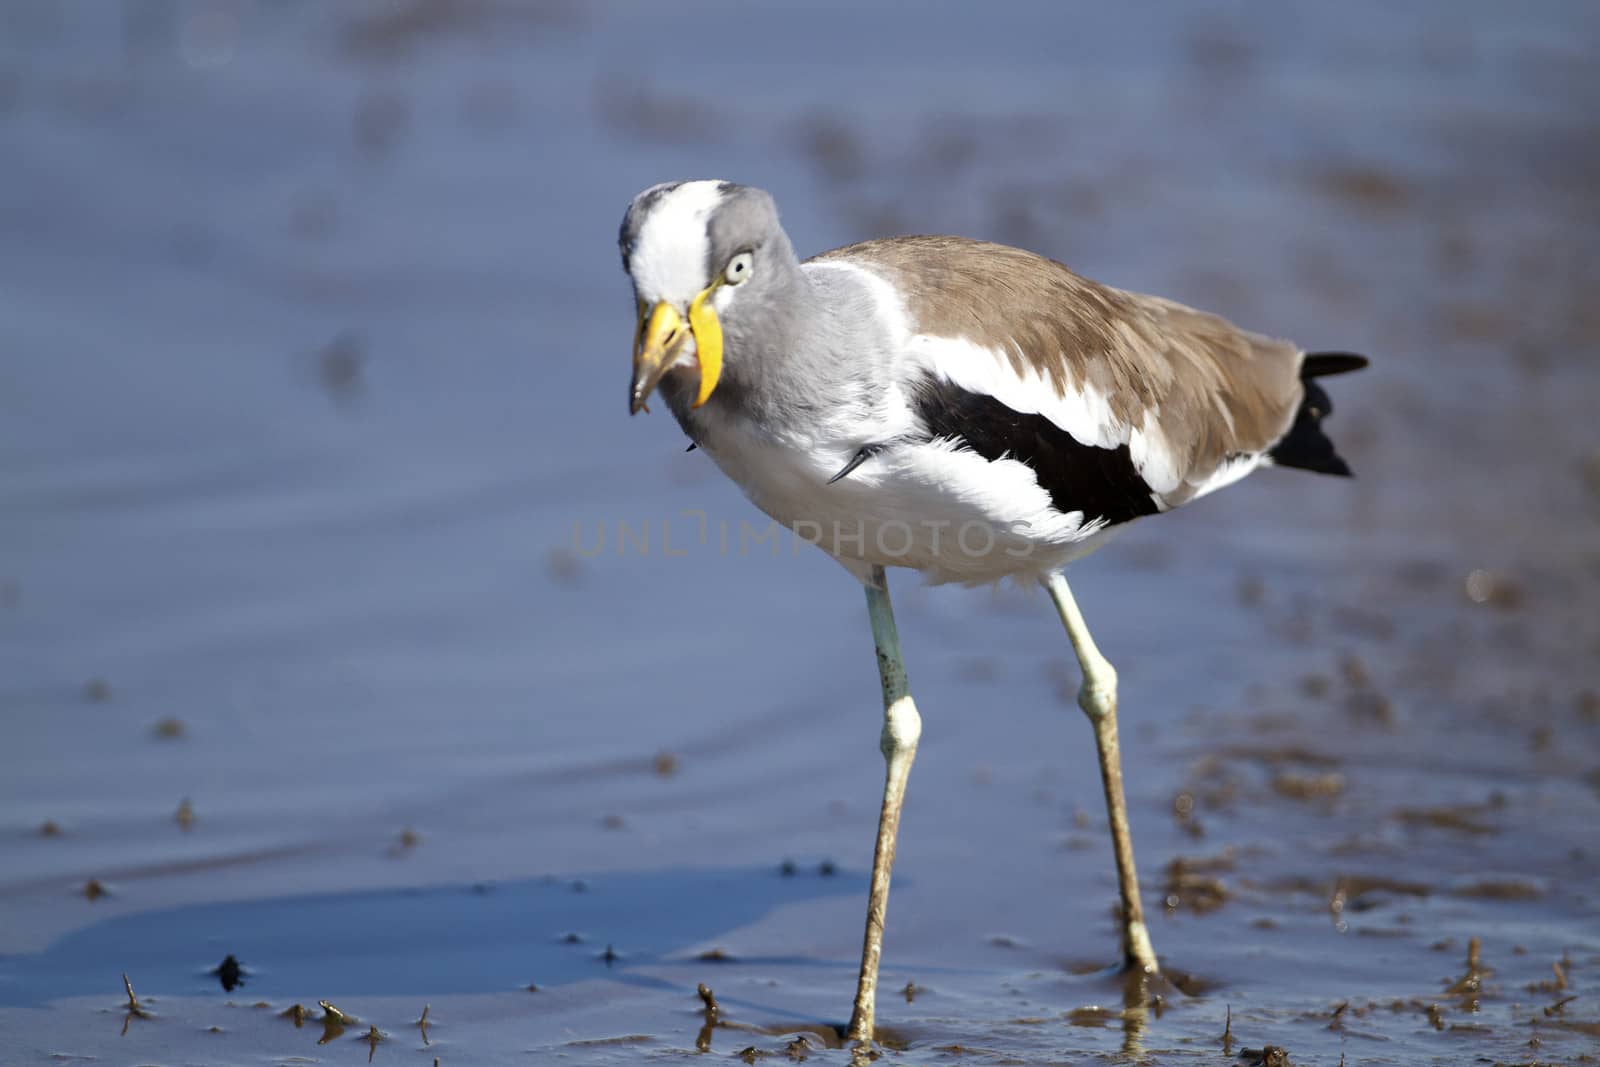 White Crowned Plover at Lower Sabie in the Kruger National Park, South Africa